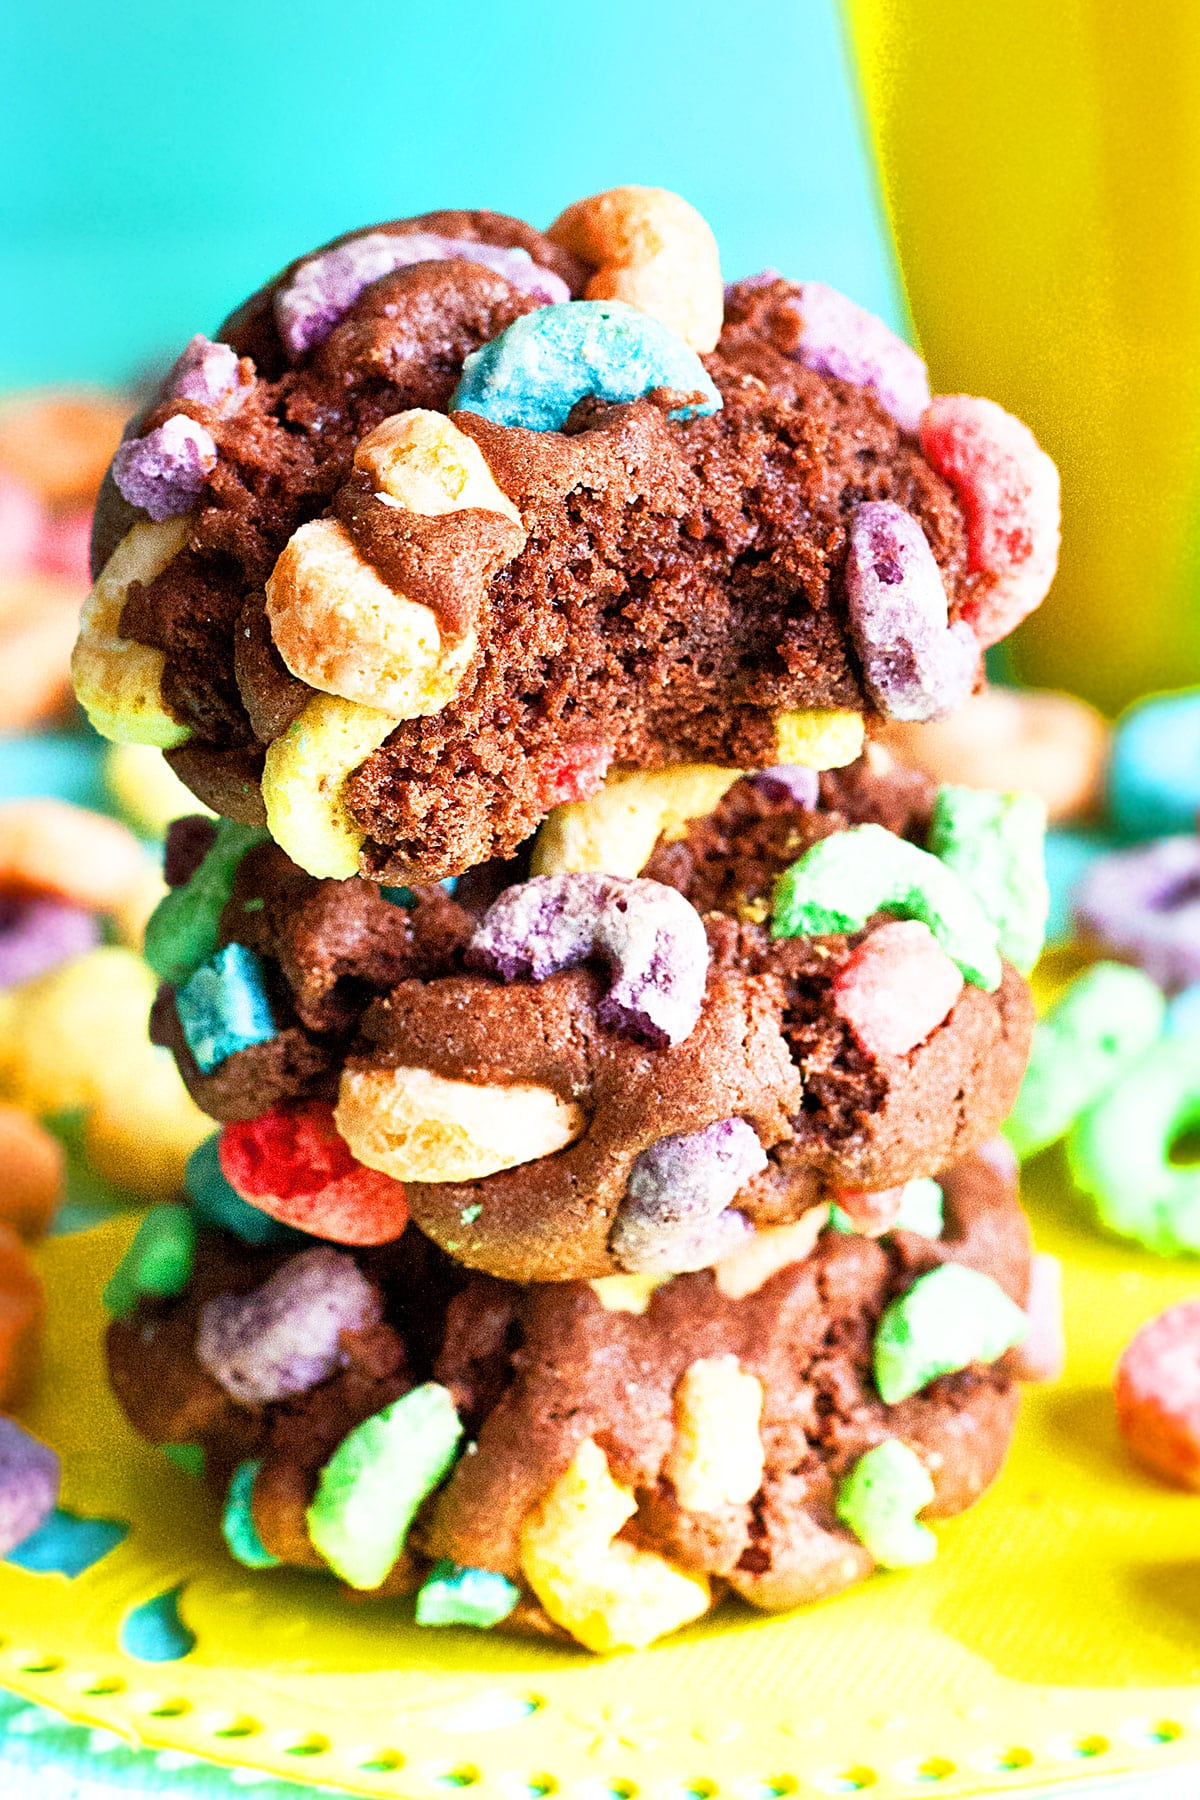 Stack of Crispy Chocolate Cookies on Colorful Background